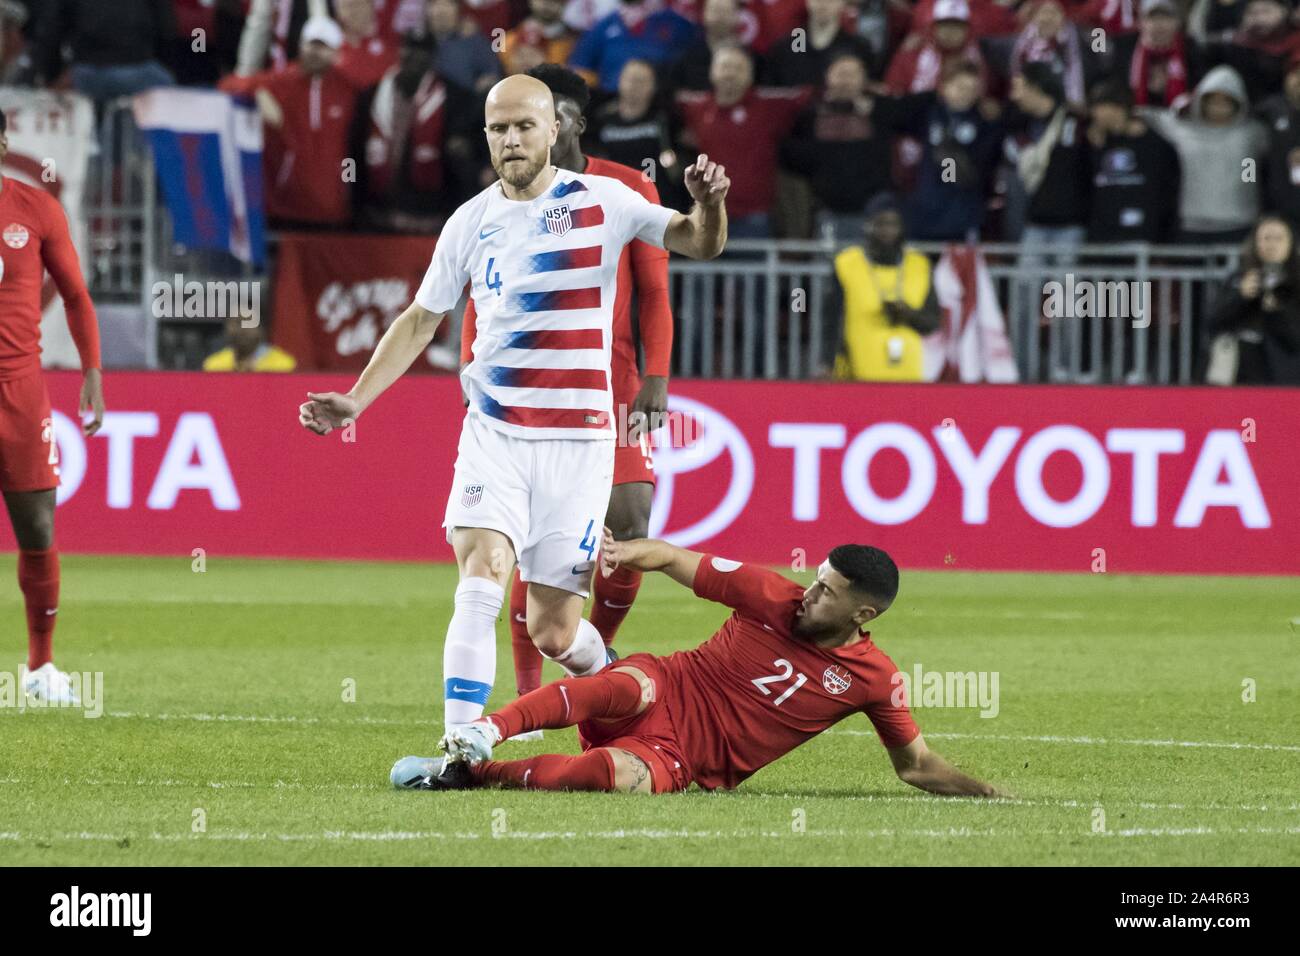 Toronto, Ontario, Canada. 15th Oct, 2019. Michael Bradley (4) and Jonathan Osorio (21) in action during the Canada vs USA - Nations League qualifier game Credit: Angel Marchini/ZUMA Wire/Alamy Live News Stock Photo